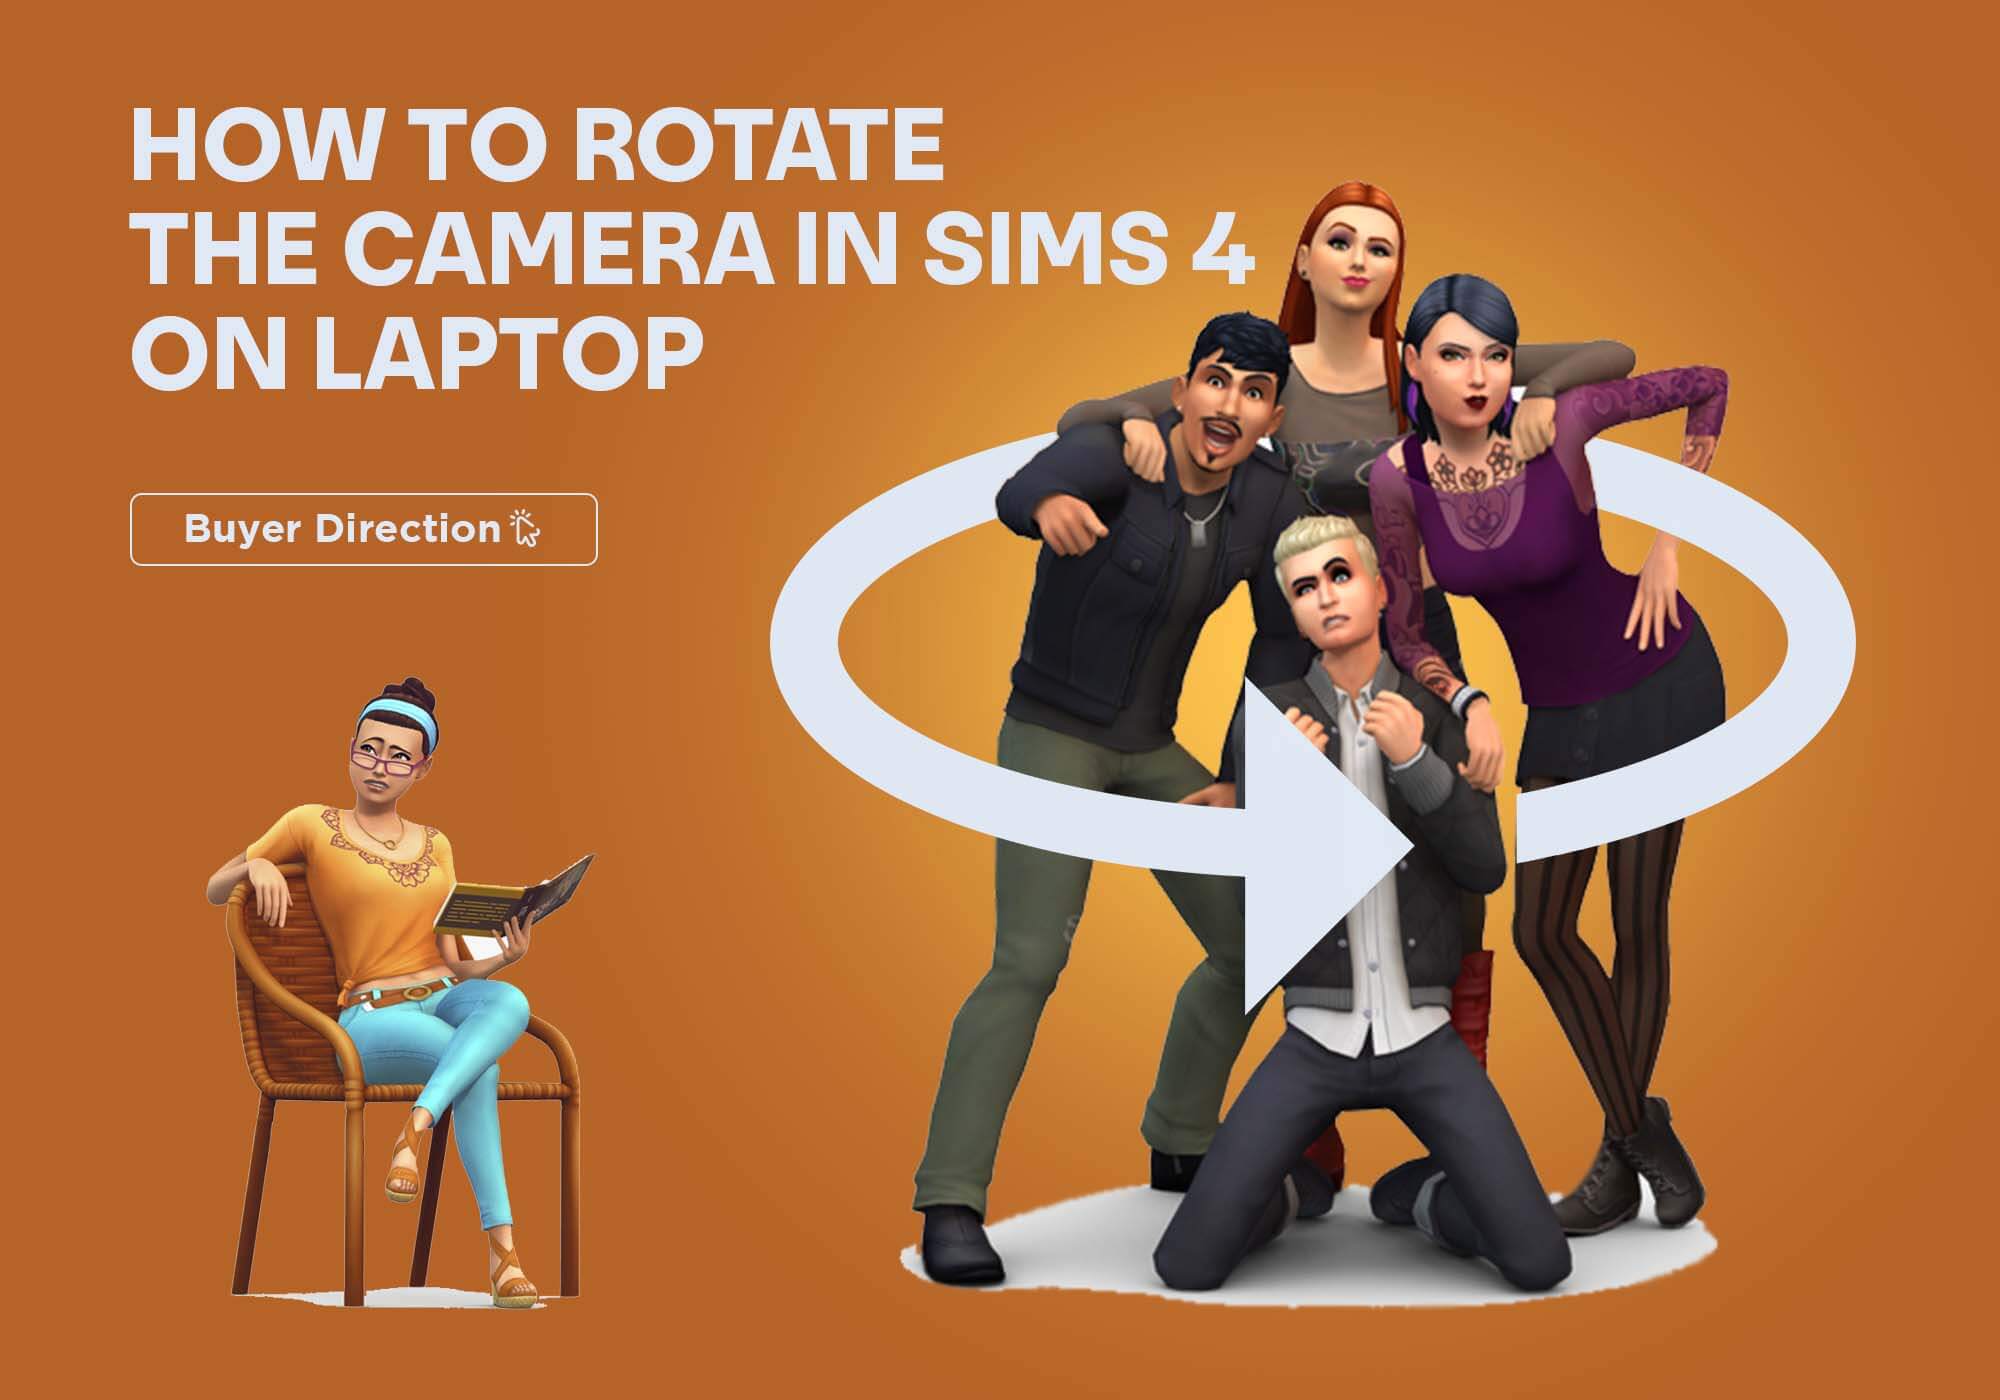 Sims 4 How to Rotate Camera on Laptop 